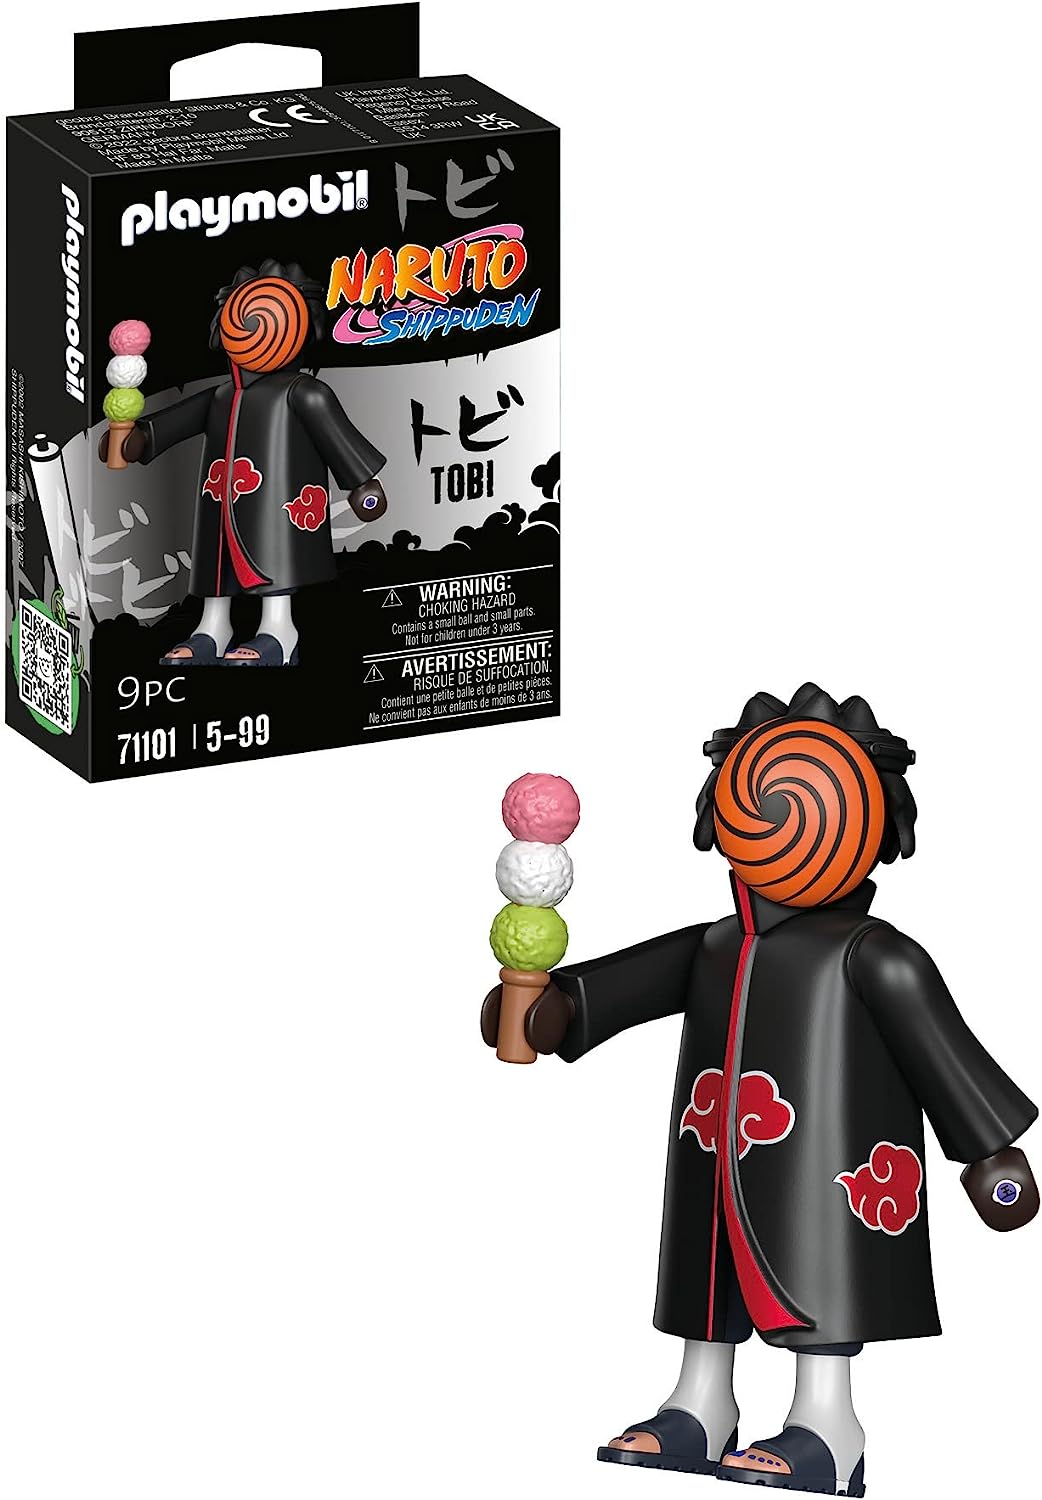 Playmobil Naruto Shippuden 71101 Tobi with Dango Balls, Creative Fun for Anime Fans With Great Details and Authentic Extras, 11 Pieces, From 5 Years